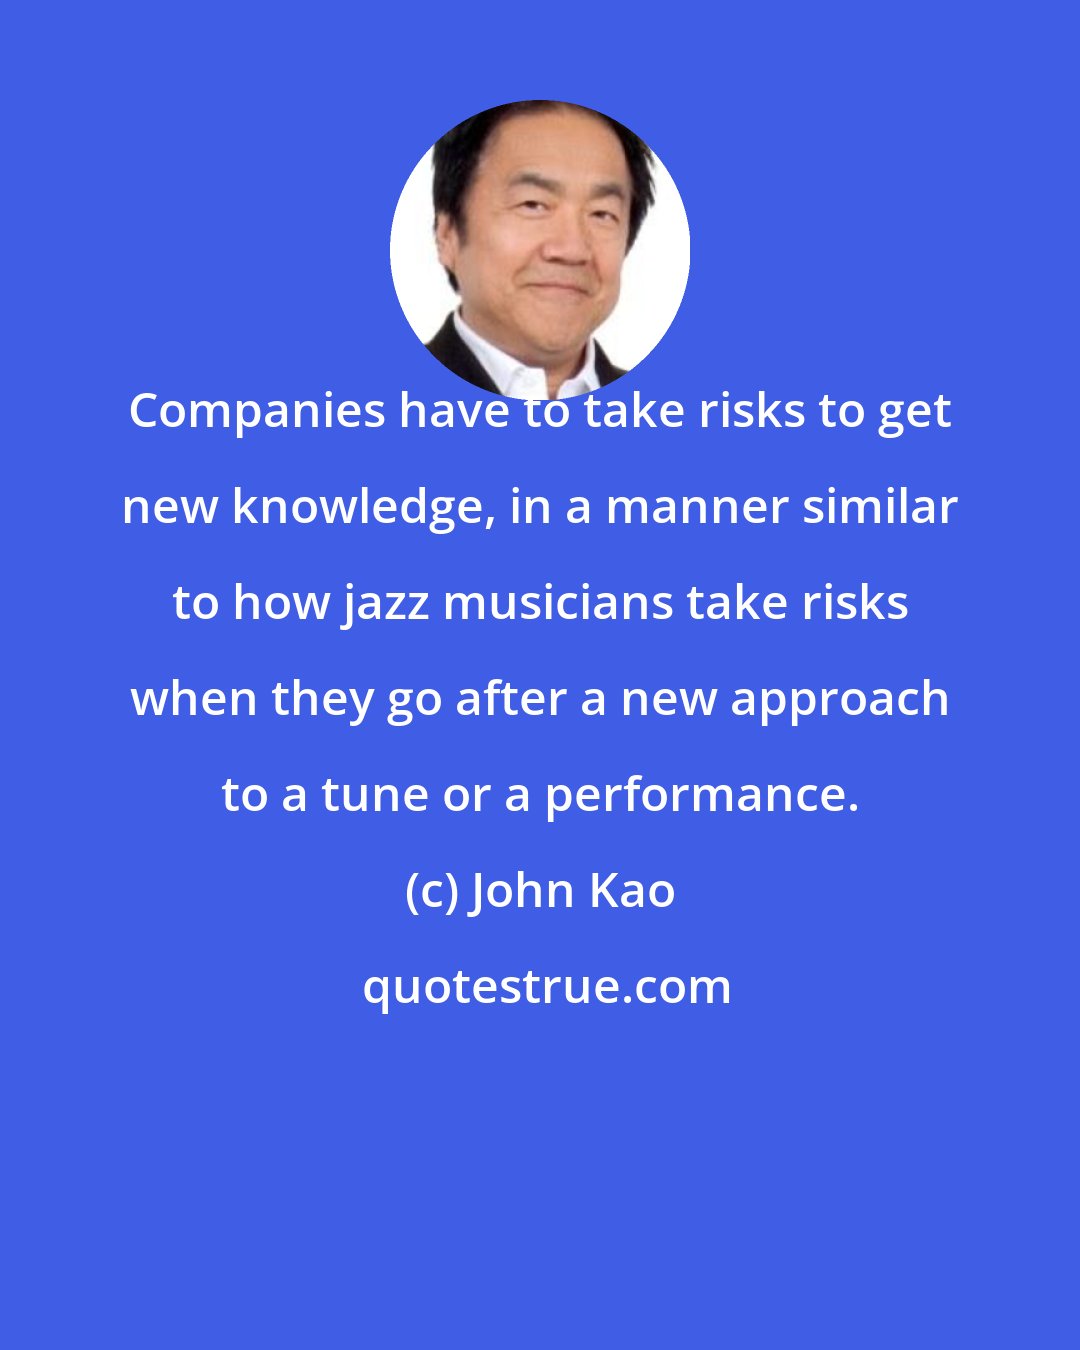 John Kao: Companies have to take risks to get new knowledge, in a manner similar to how jazz musicians take risks when they go after a new approach to a tune or a performance.